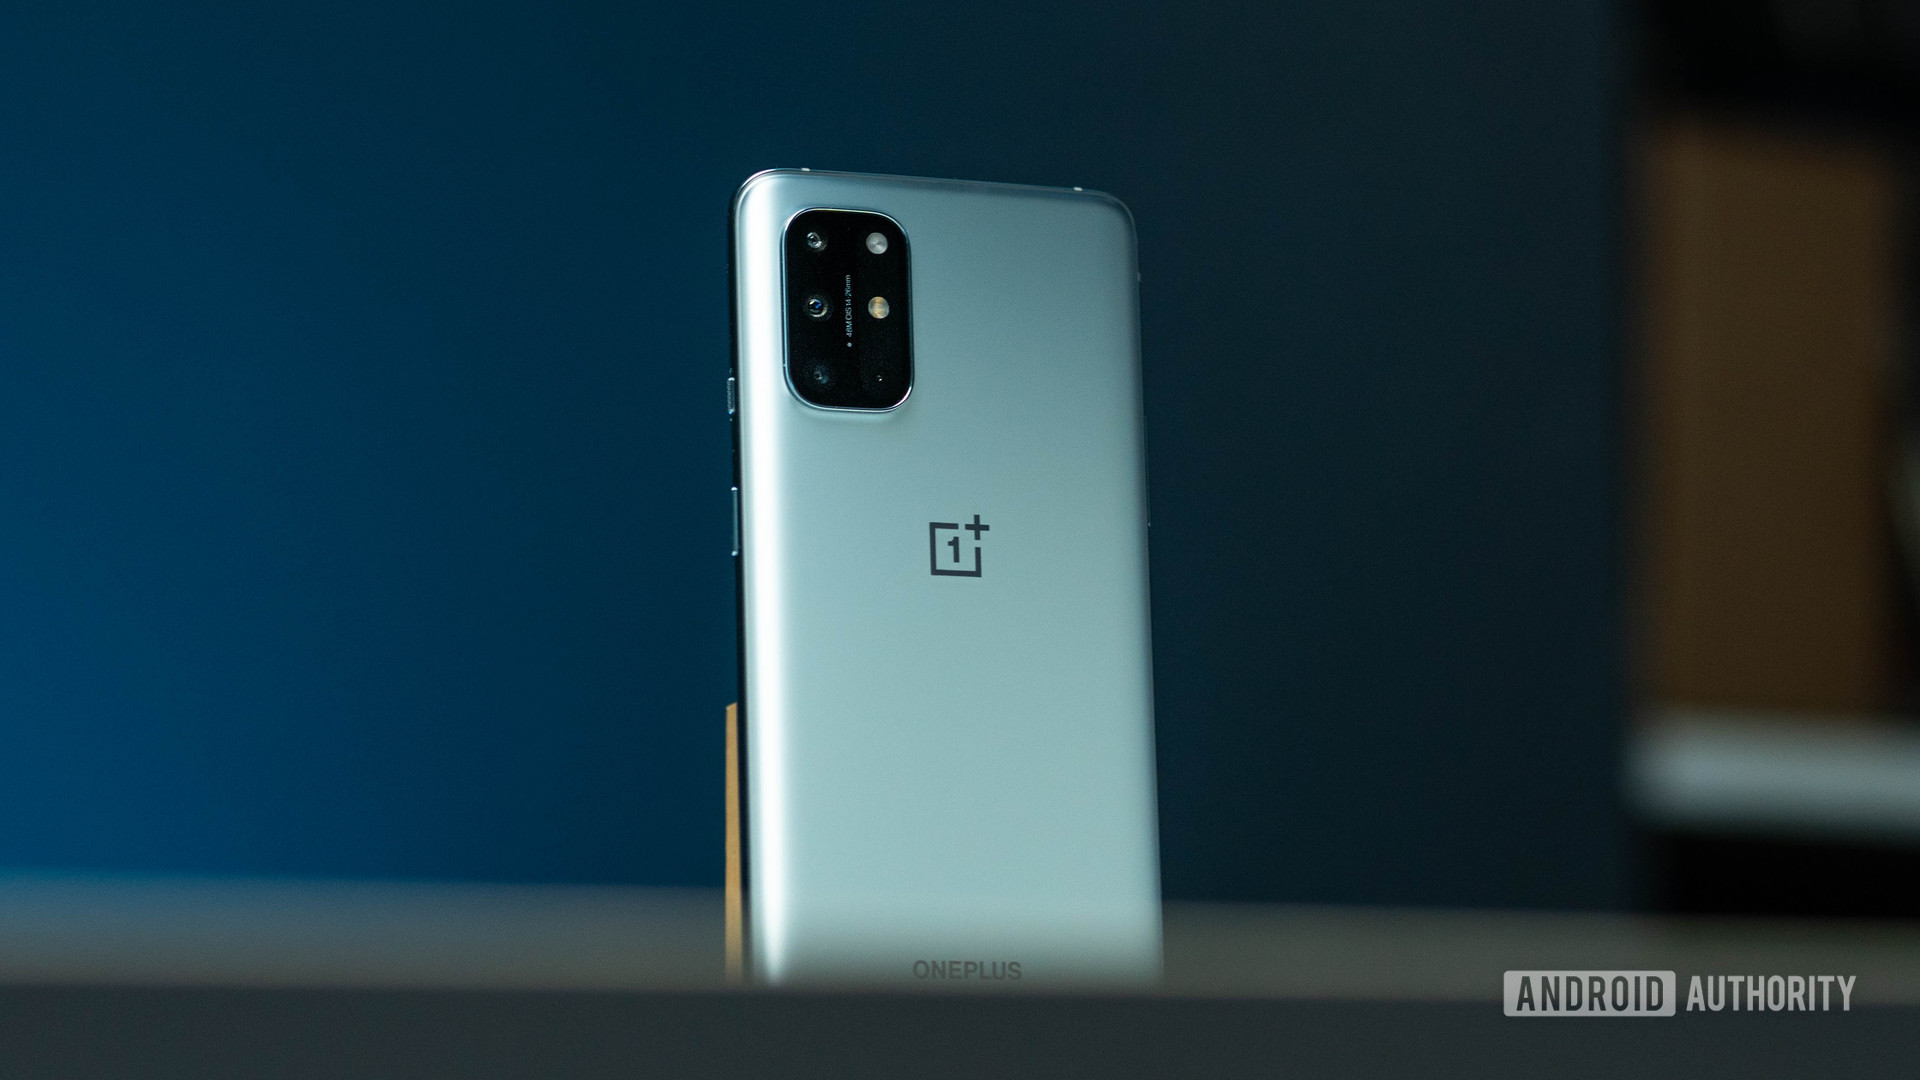 OnePlus 8T Smartphone with a Snapdragon 865 5G processor